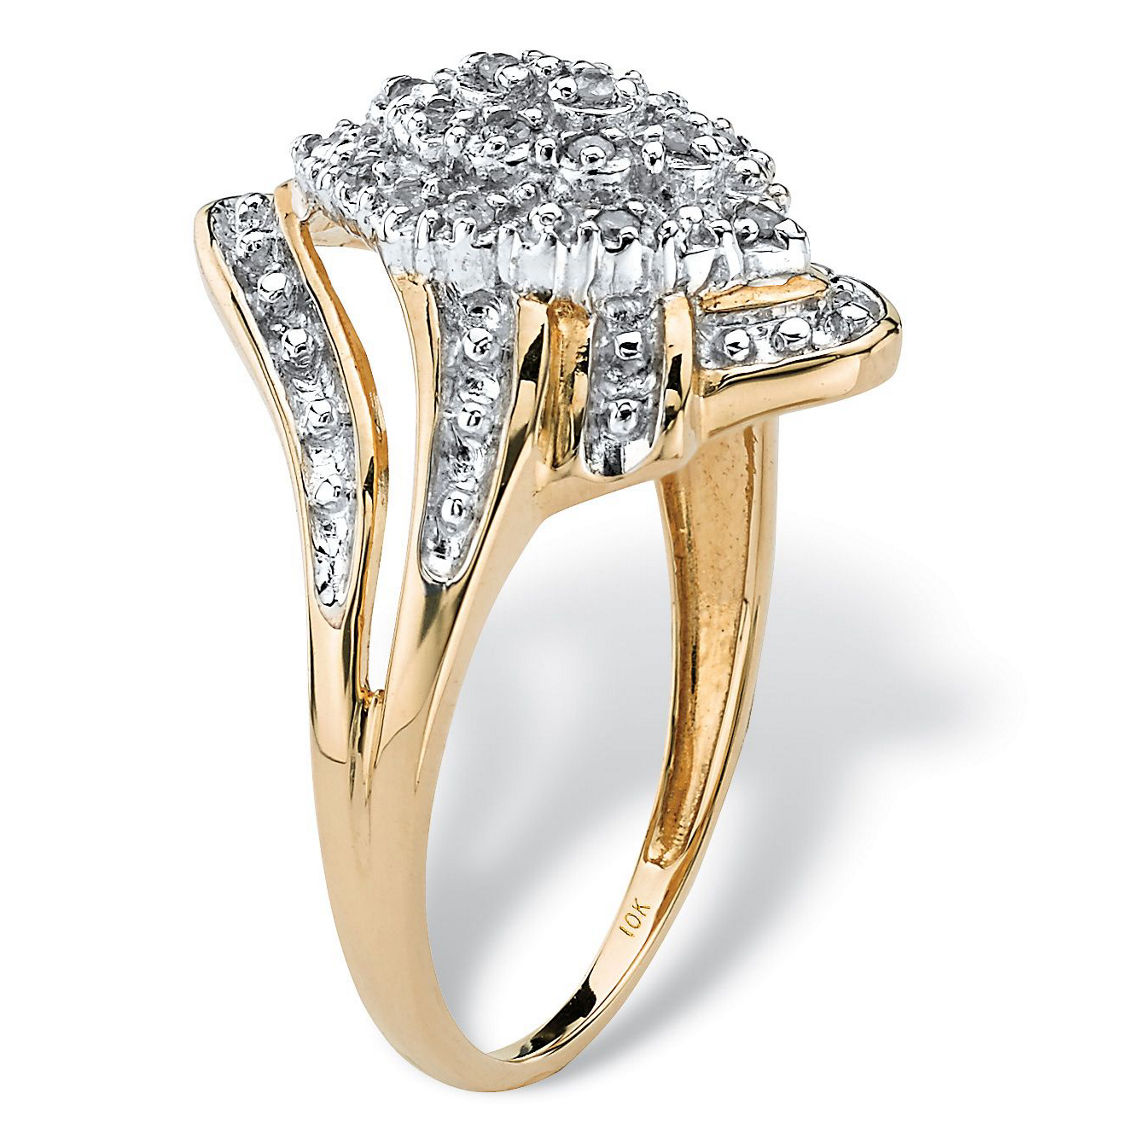 1/10 TCW Round Diamond Swirled Cluster Ring in Solid 10k Gold - Image 2 of 5